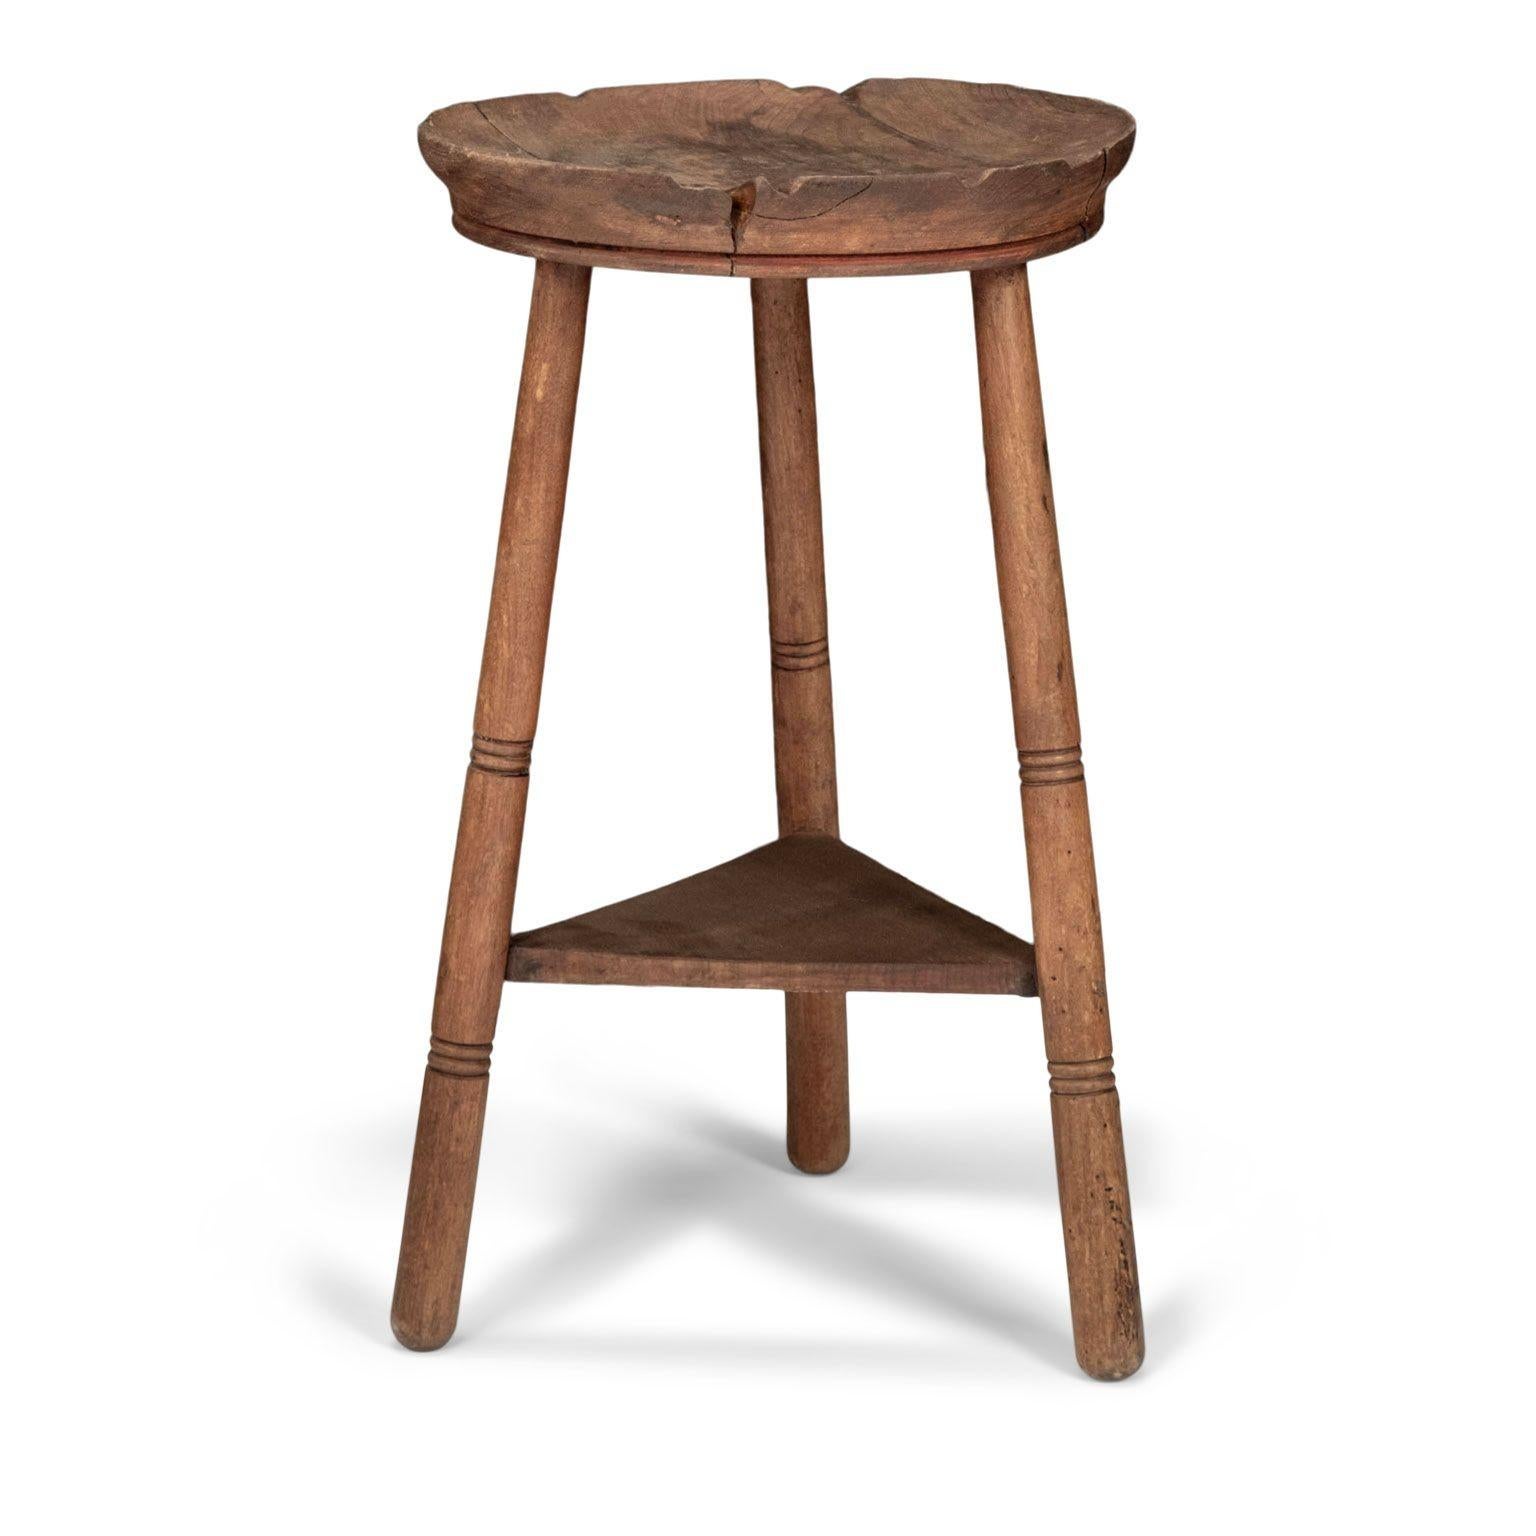 19th Century Arts and Crafts Concave-Seated Stool